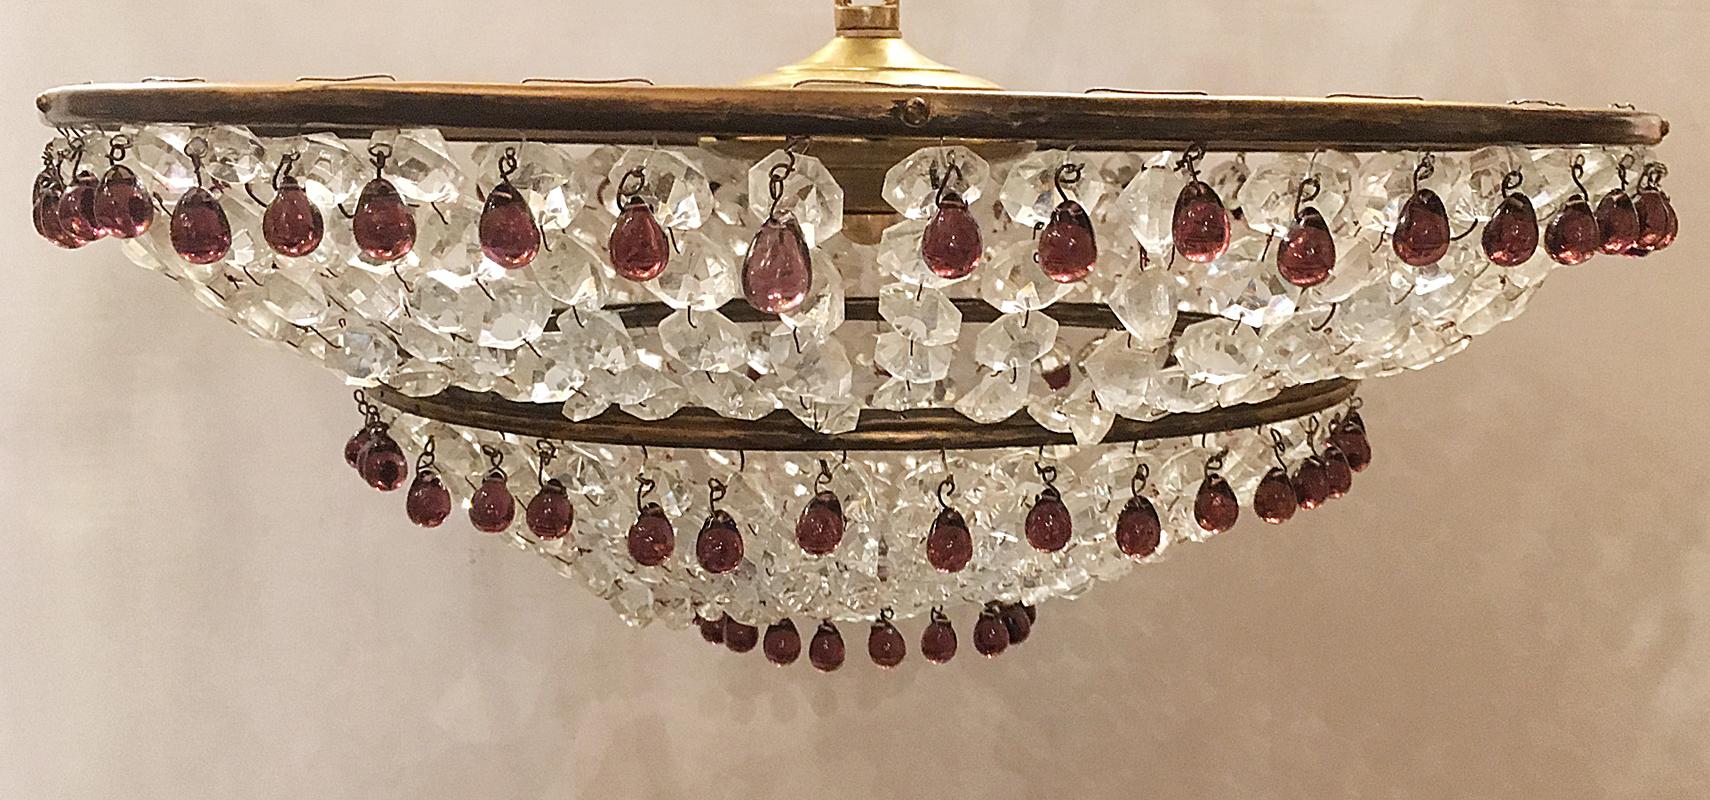 A circa 1930s French beaded crystal flush mount fixture with amethyst drops and interior candelabra lights.